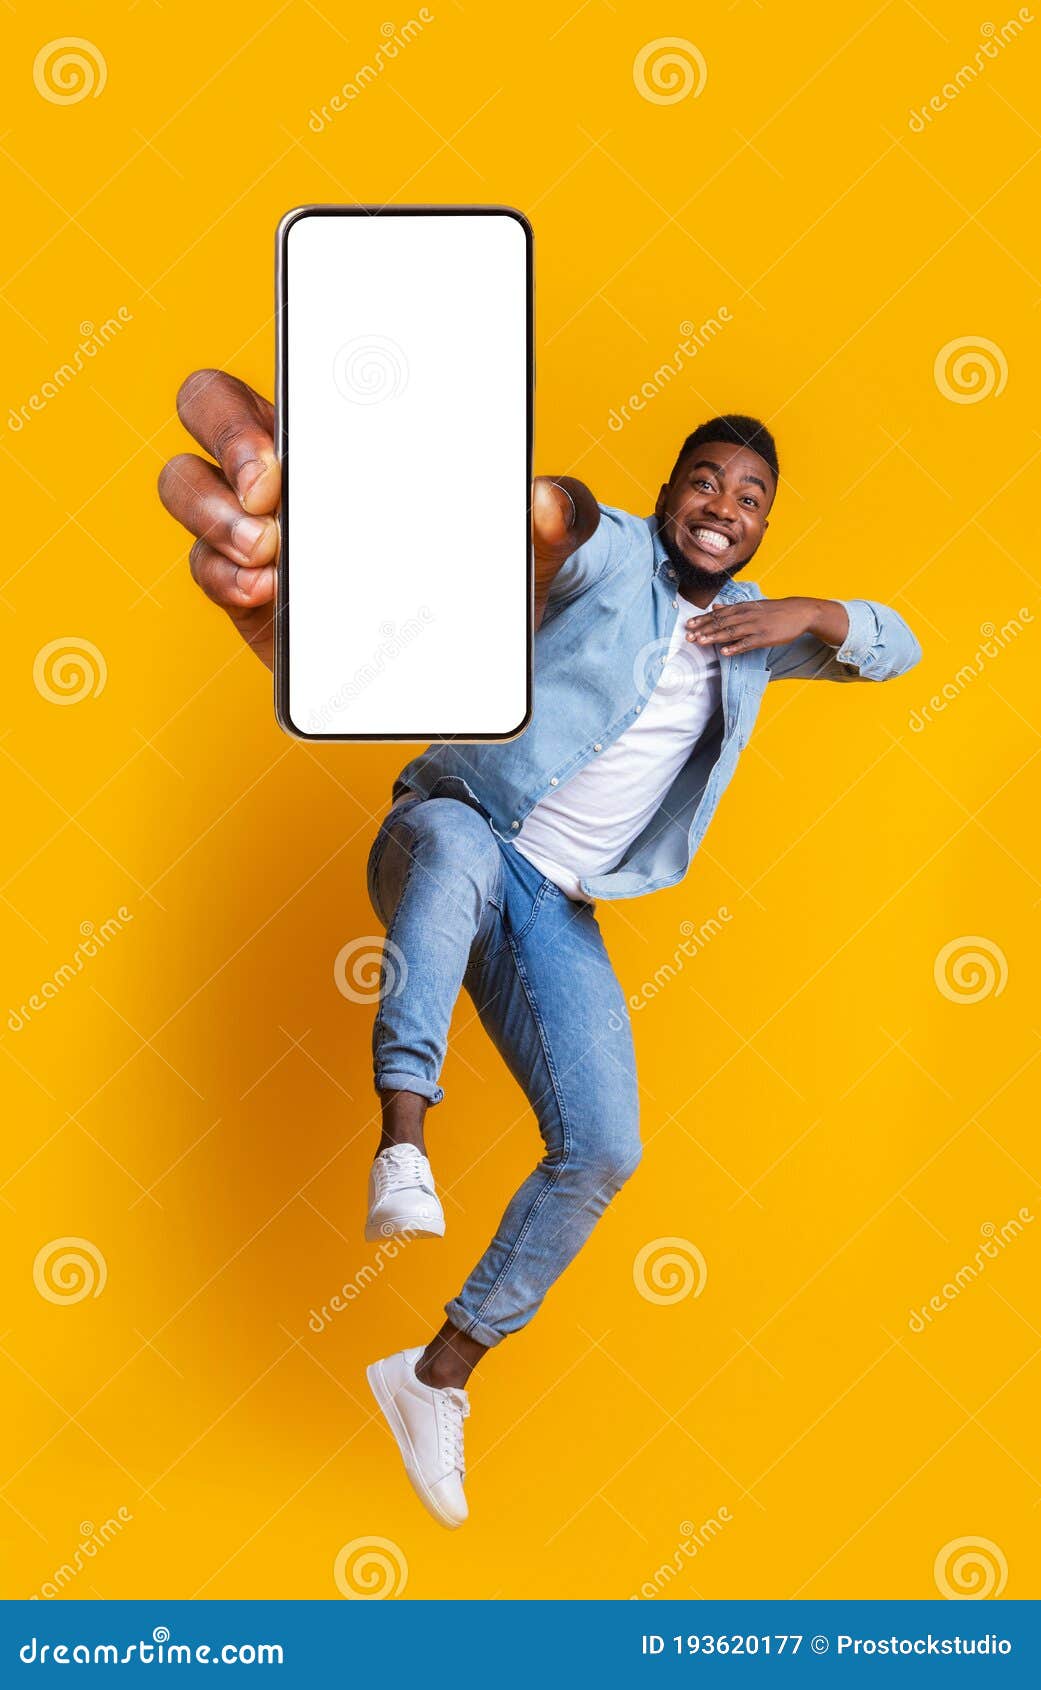 excited african guy dancing with modern smartphone